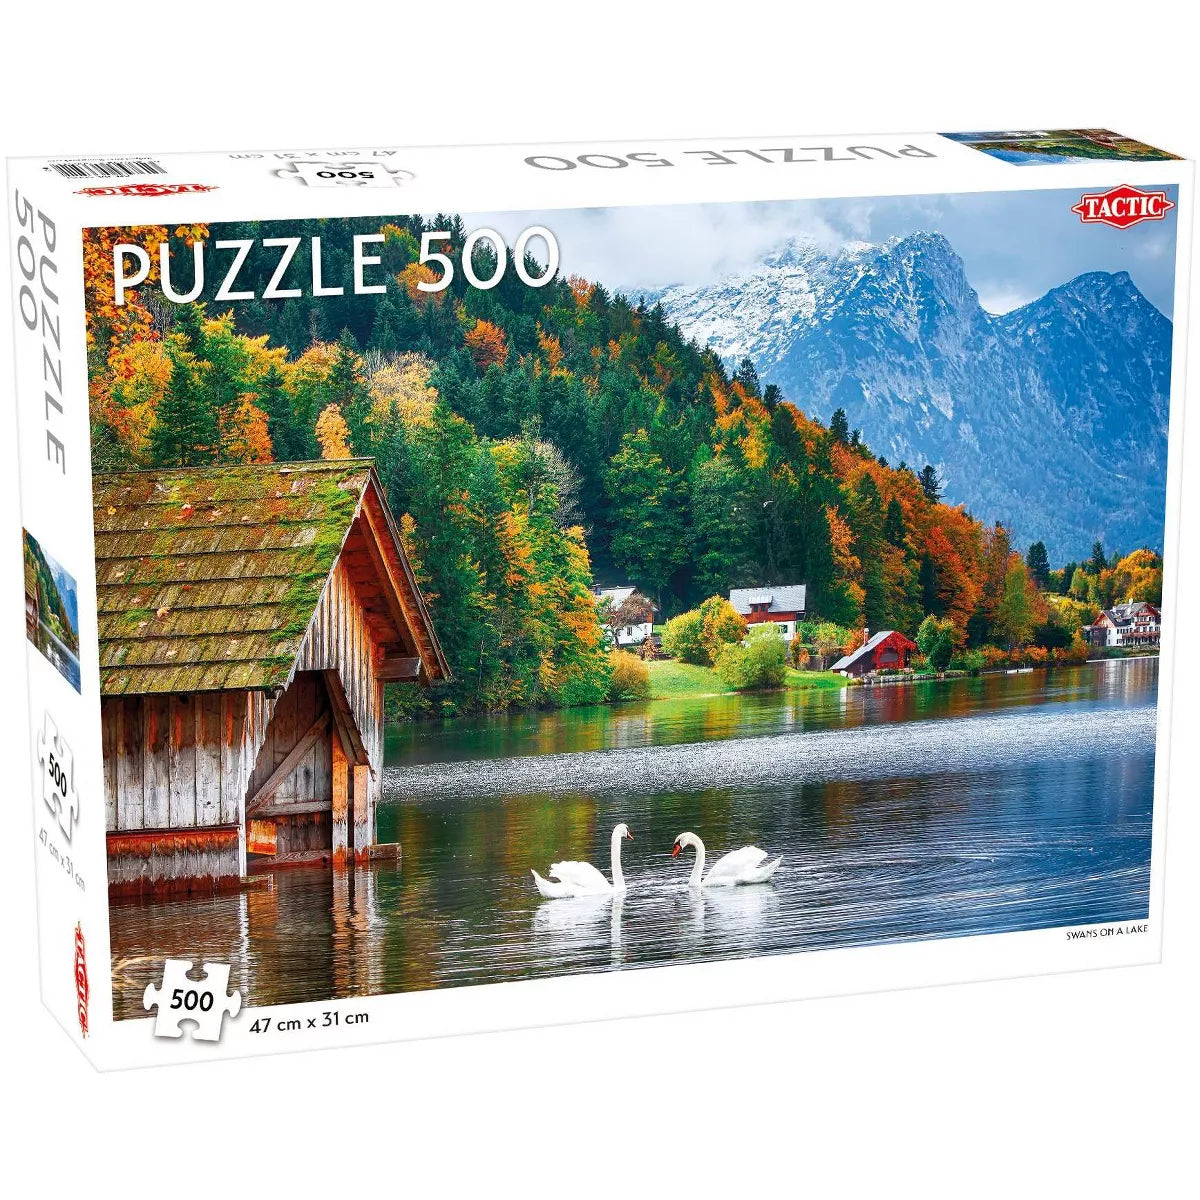 Swans on a Lake Jigsaw Puzzle - 500pc